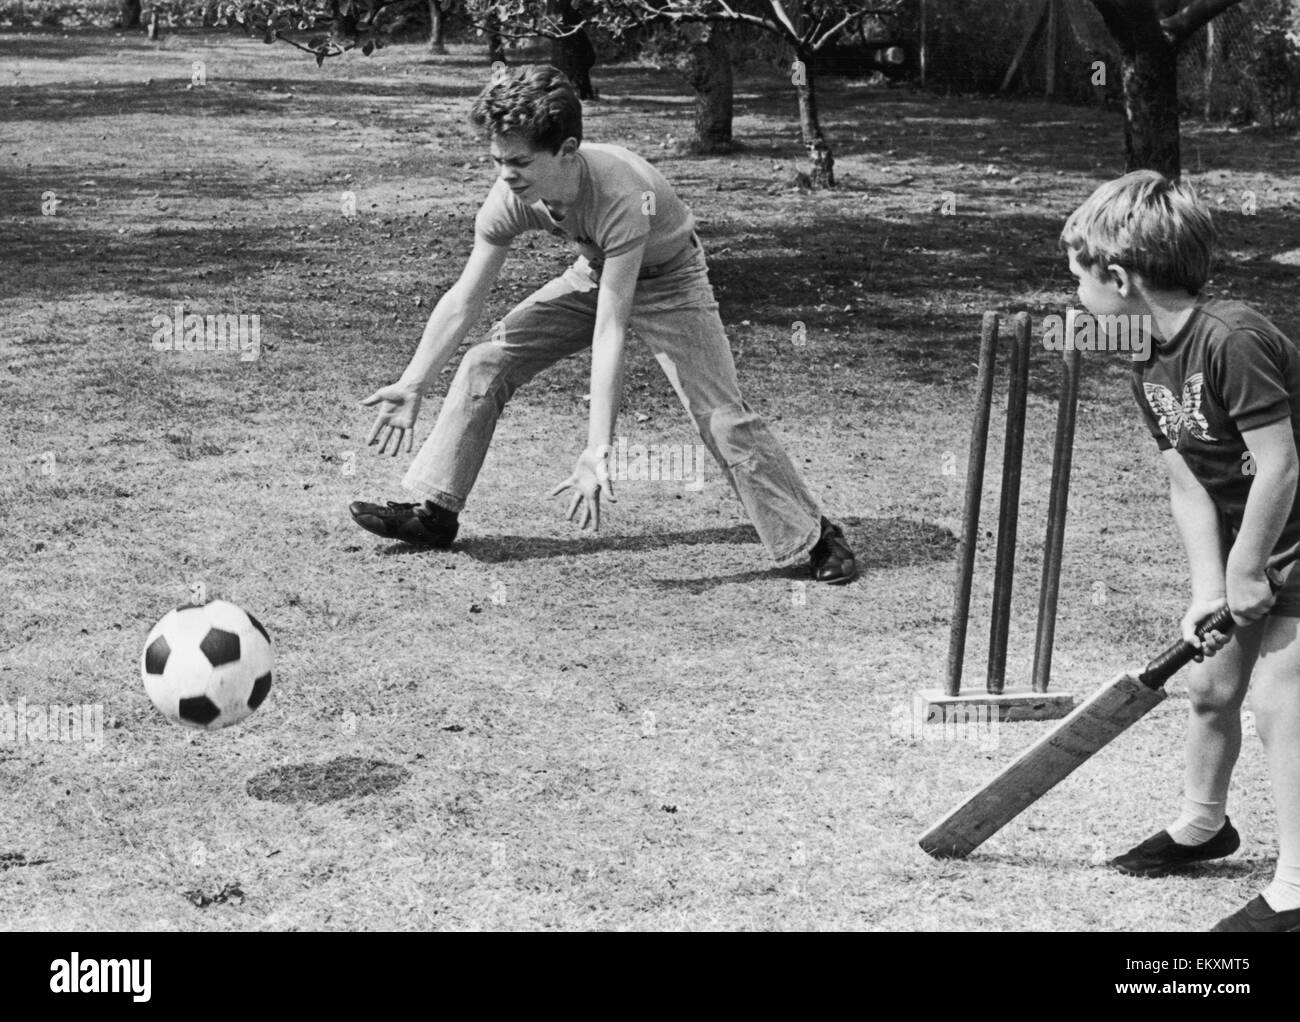 Fourteen year old Stephen Pulley from Chatteris, Cambridge who has been totally blind since he was 14 months old, takes a turn as wicket keeper during a game of cricket with his younger brother Anthony. The ball is filled with ball bearings that rattle wh Stock Photo